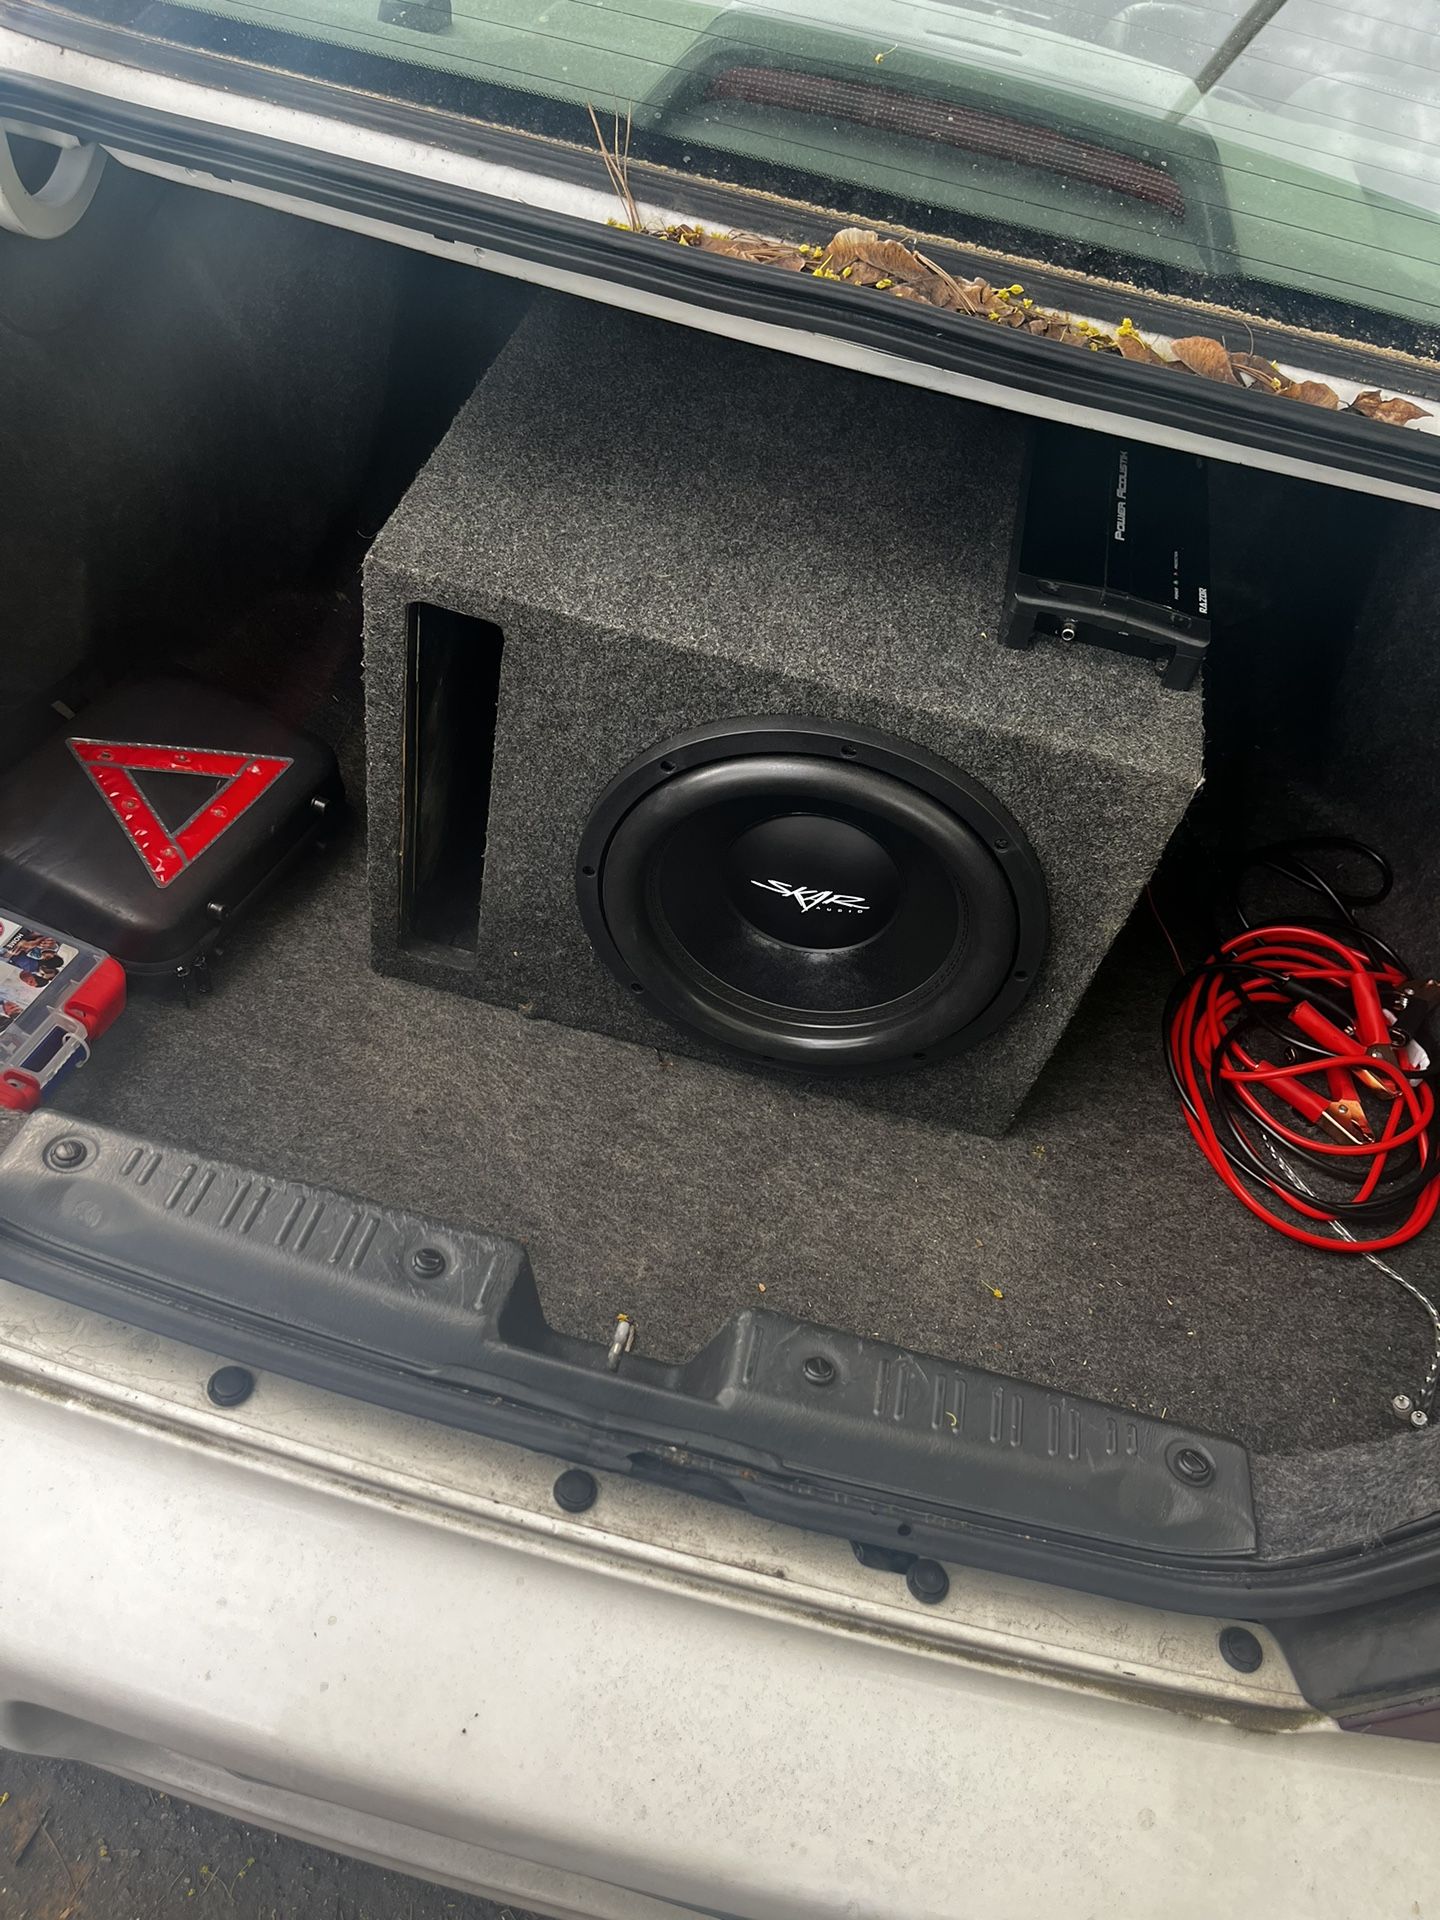 12in Scar Audio In Box With Amp